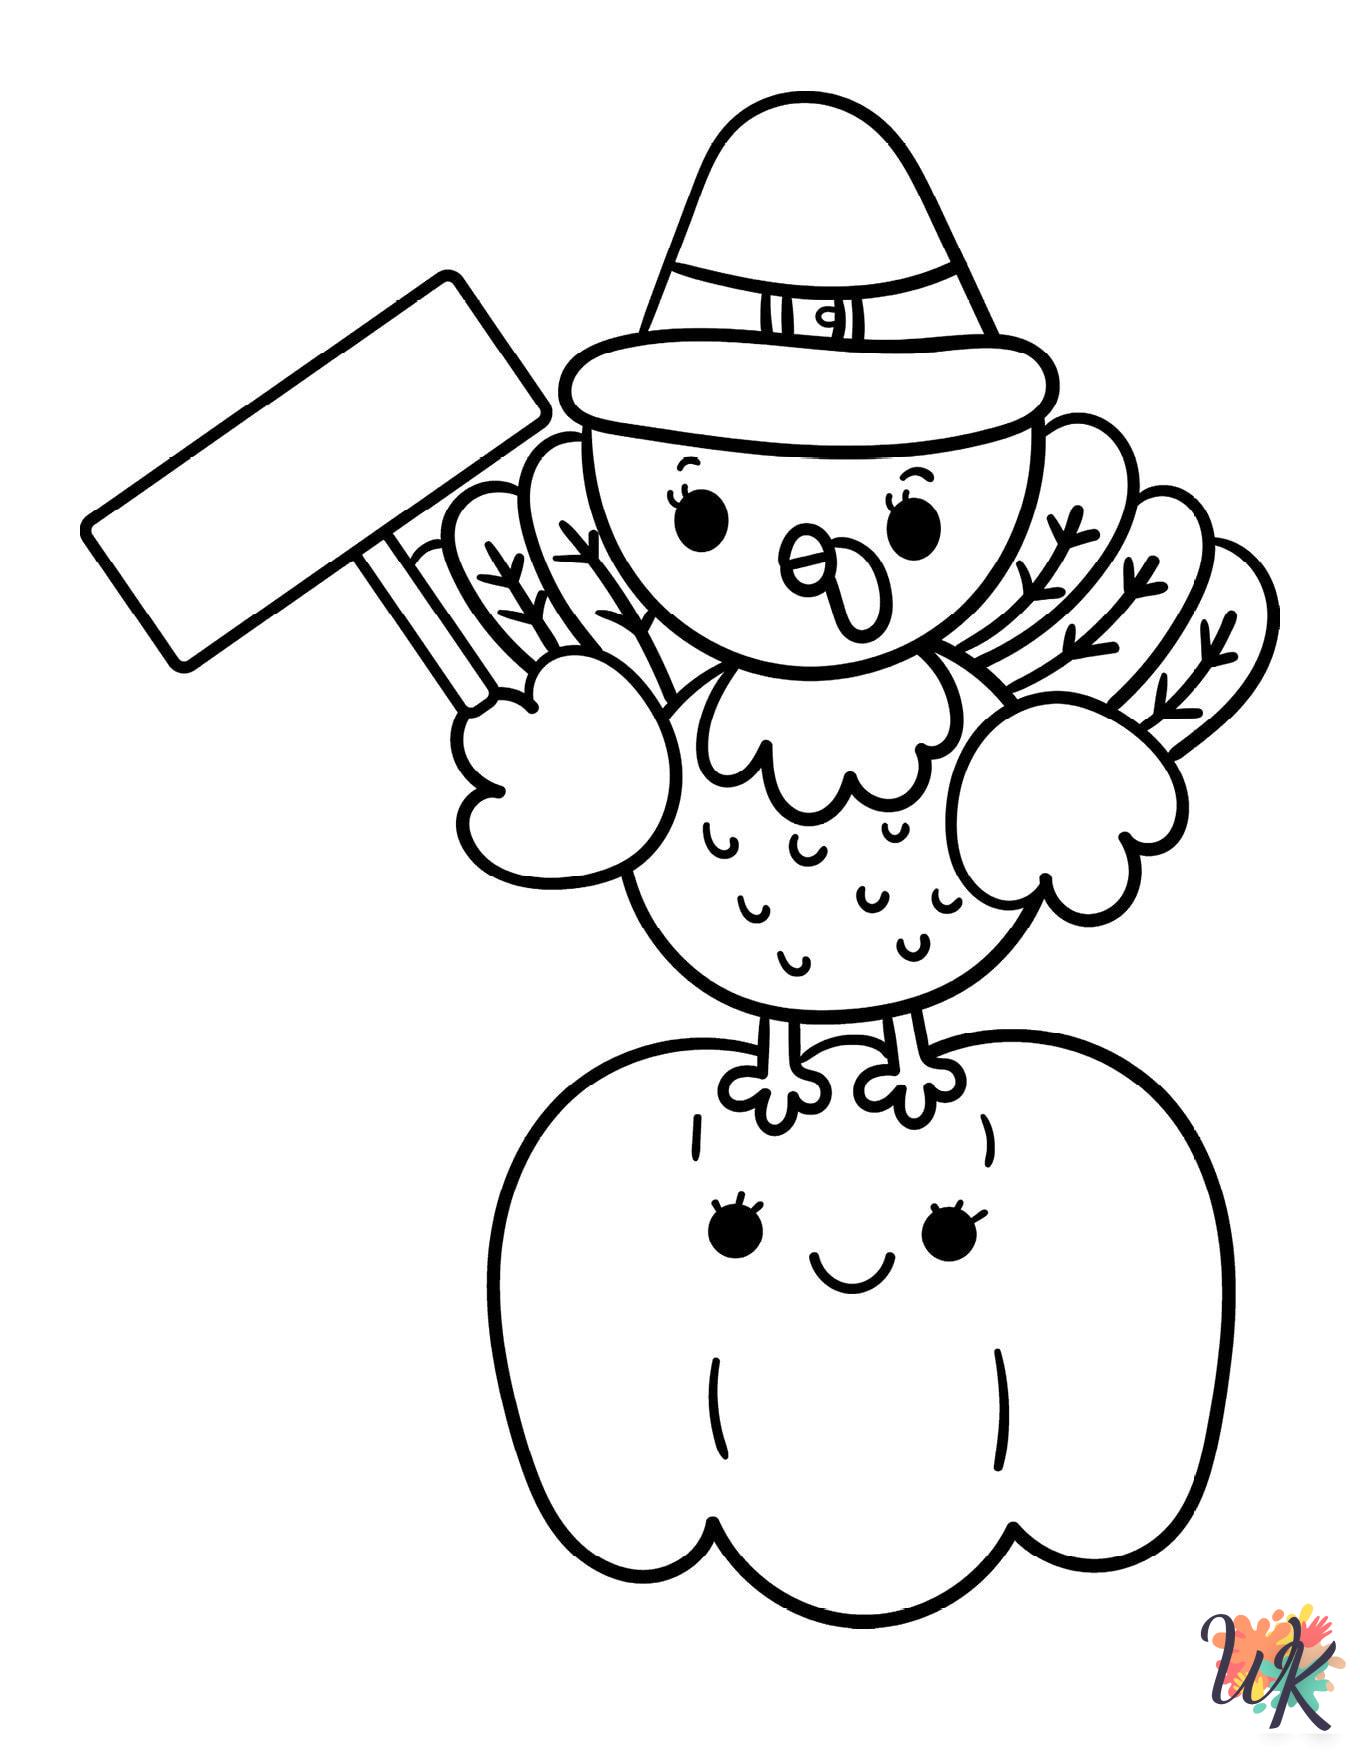 Turkey coloring pages printable free